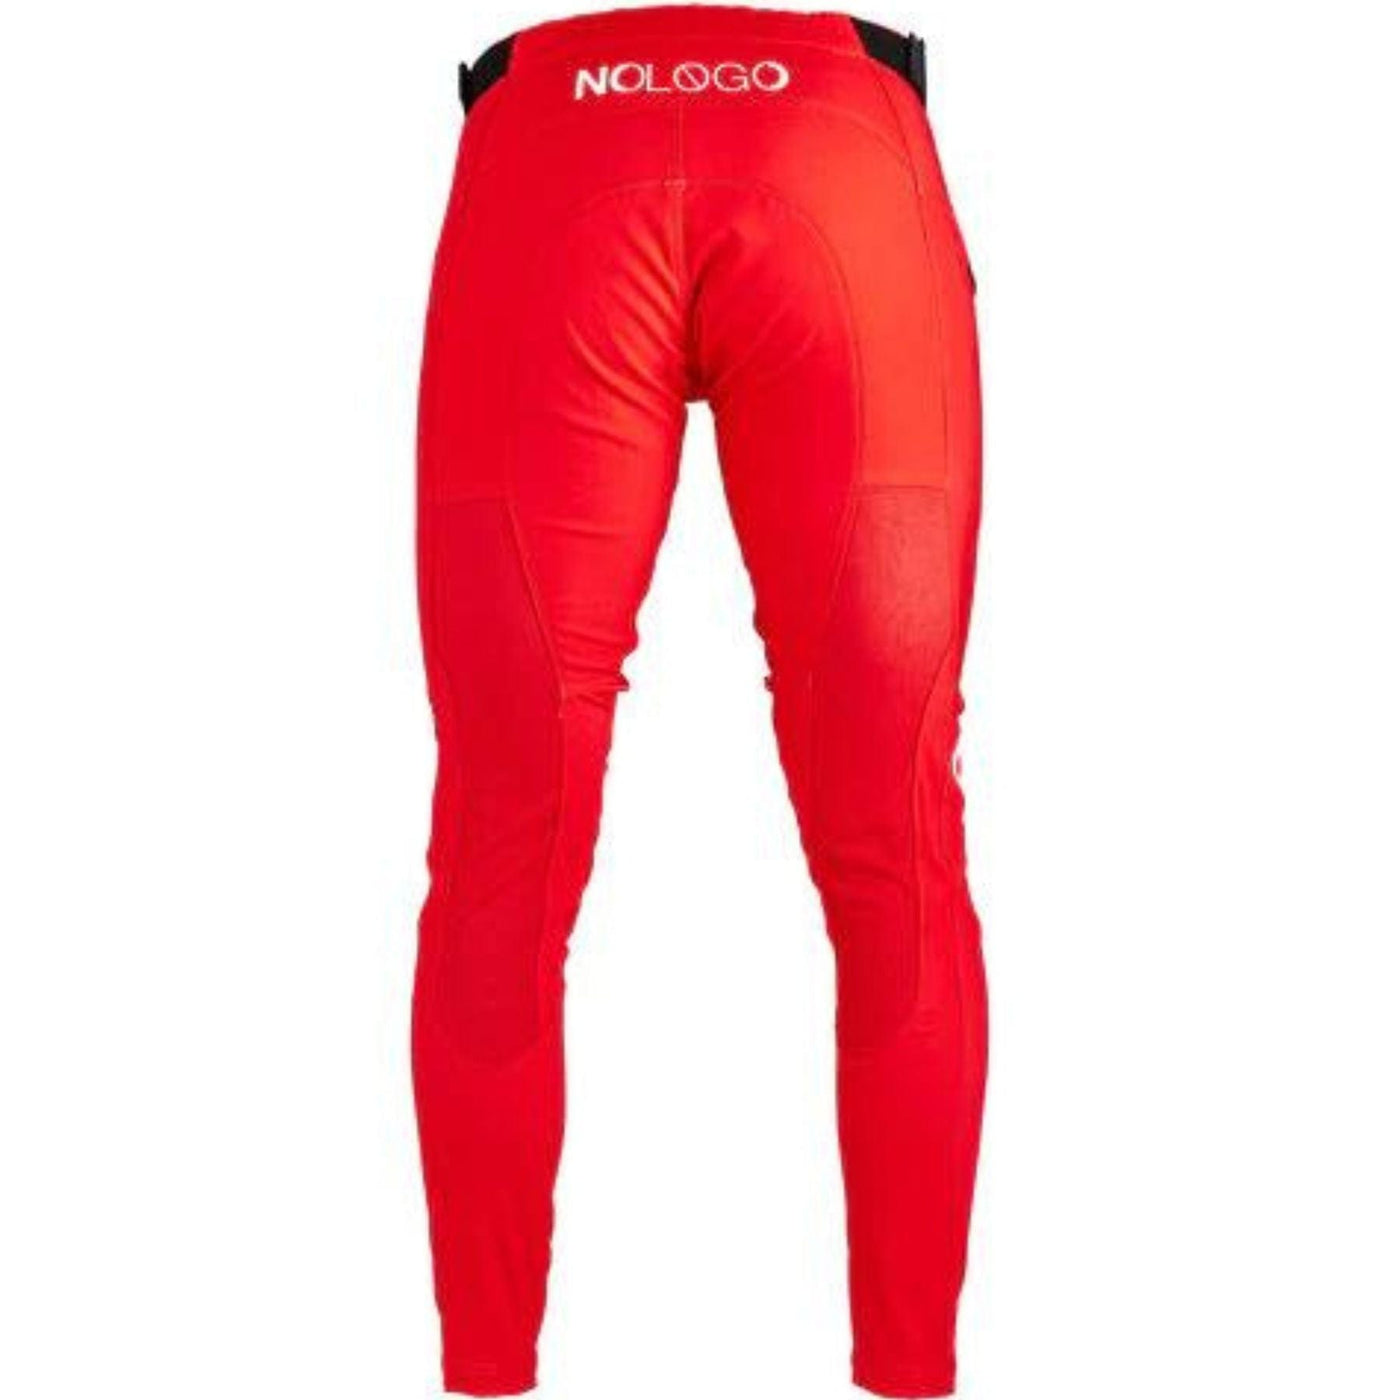 NoLogo Racer Youth BMX Pants - Red 8Lines Shop - Fast Shipping